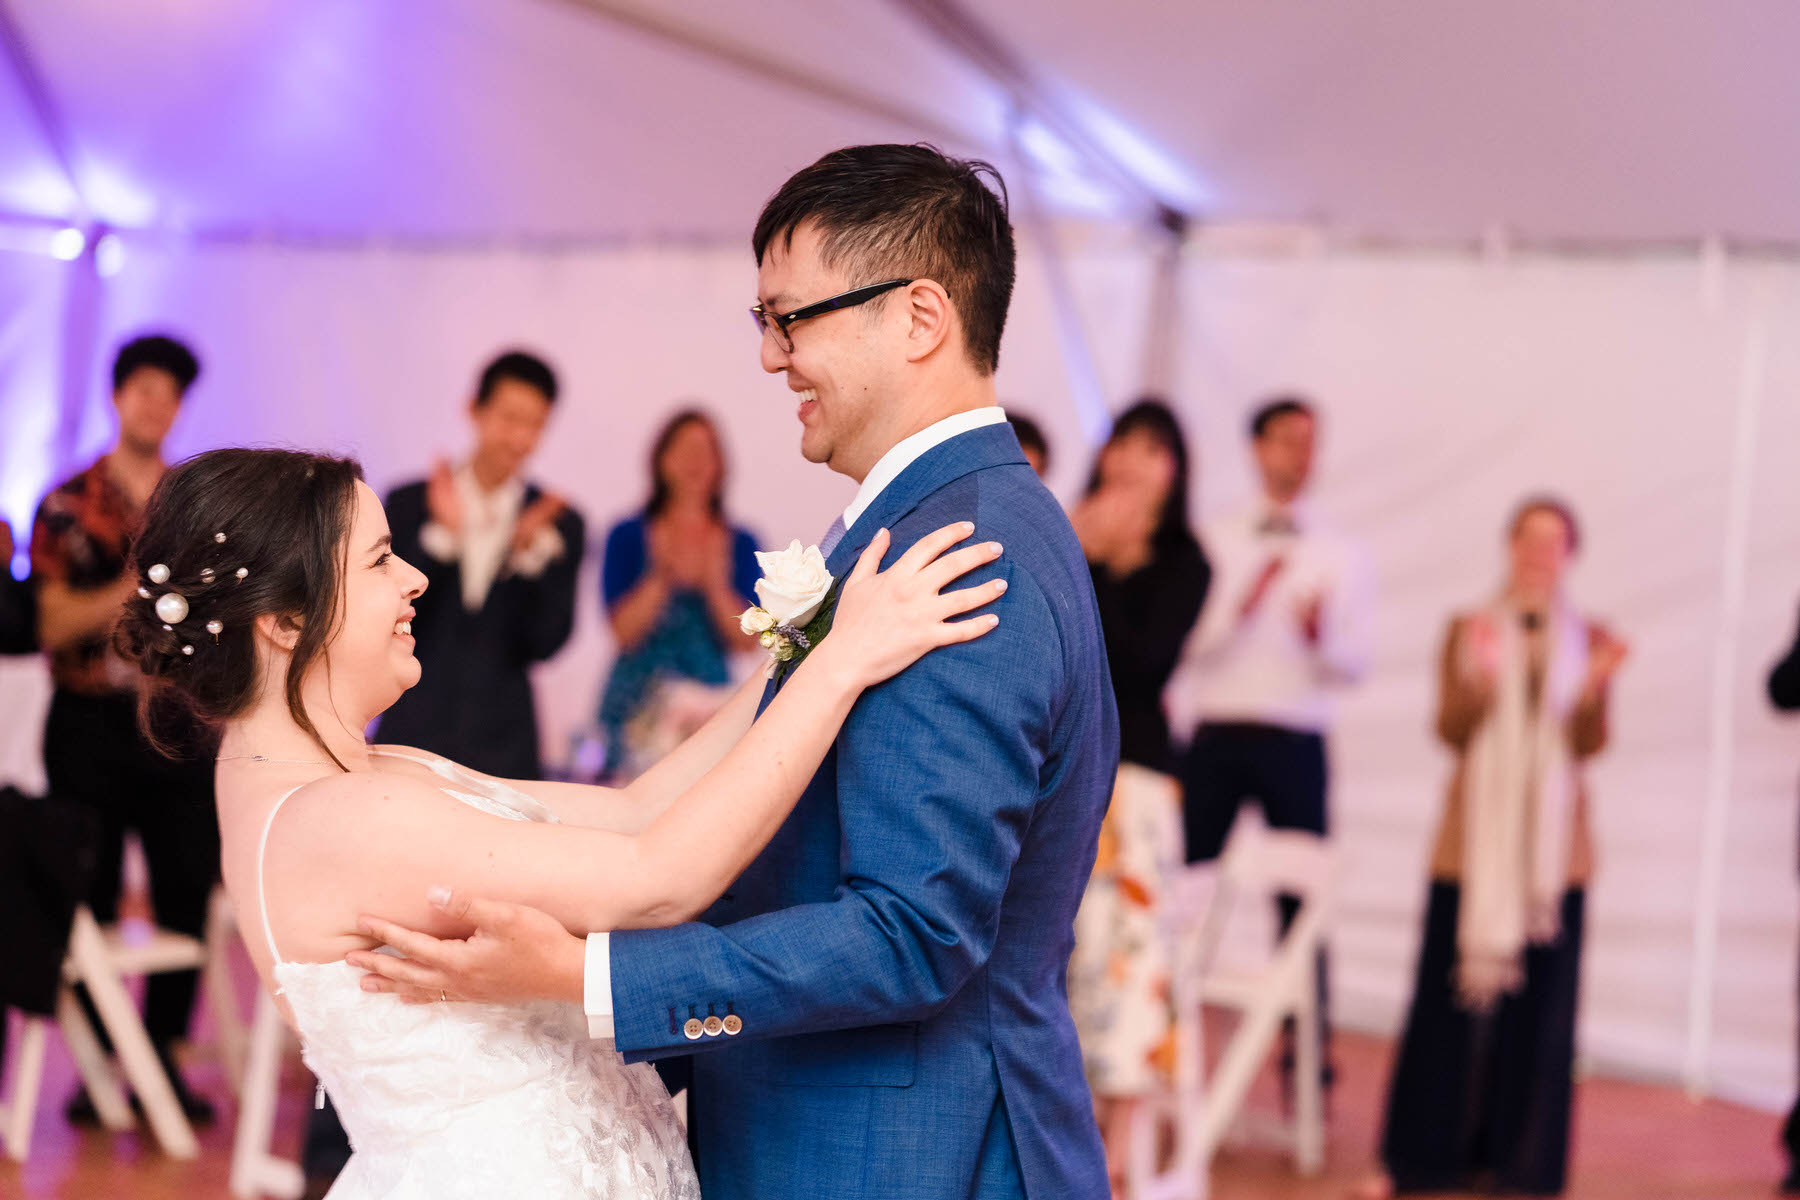 museum of science boston wedding by Nicole chan photography